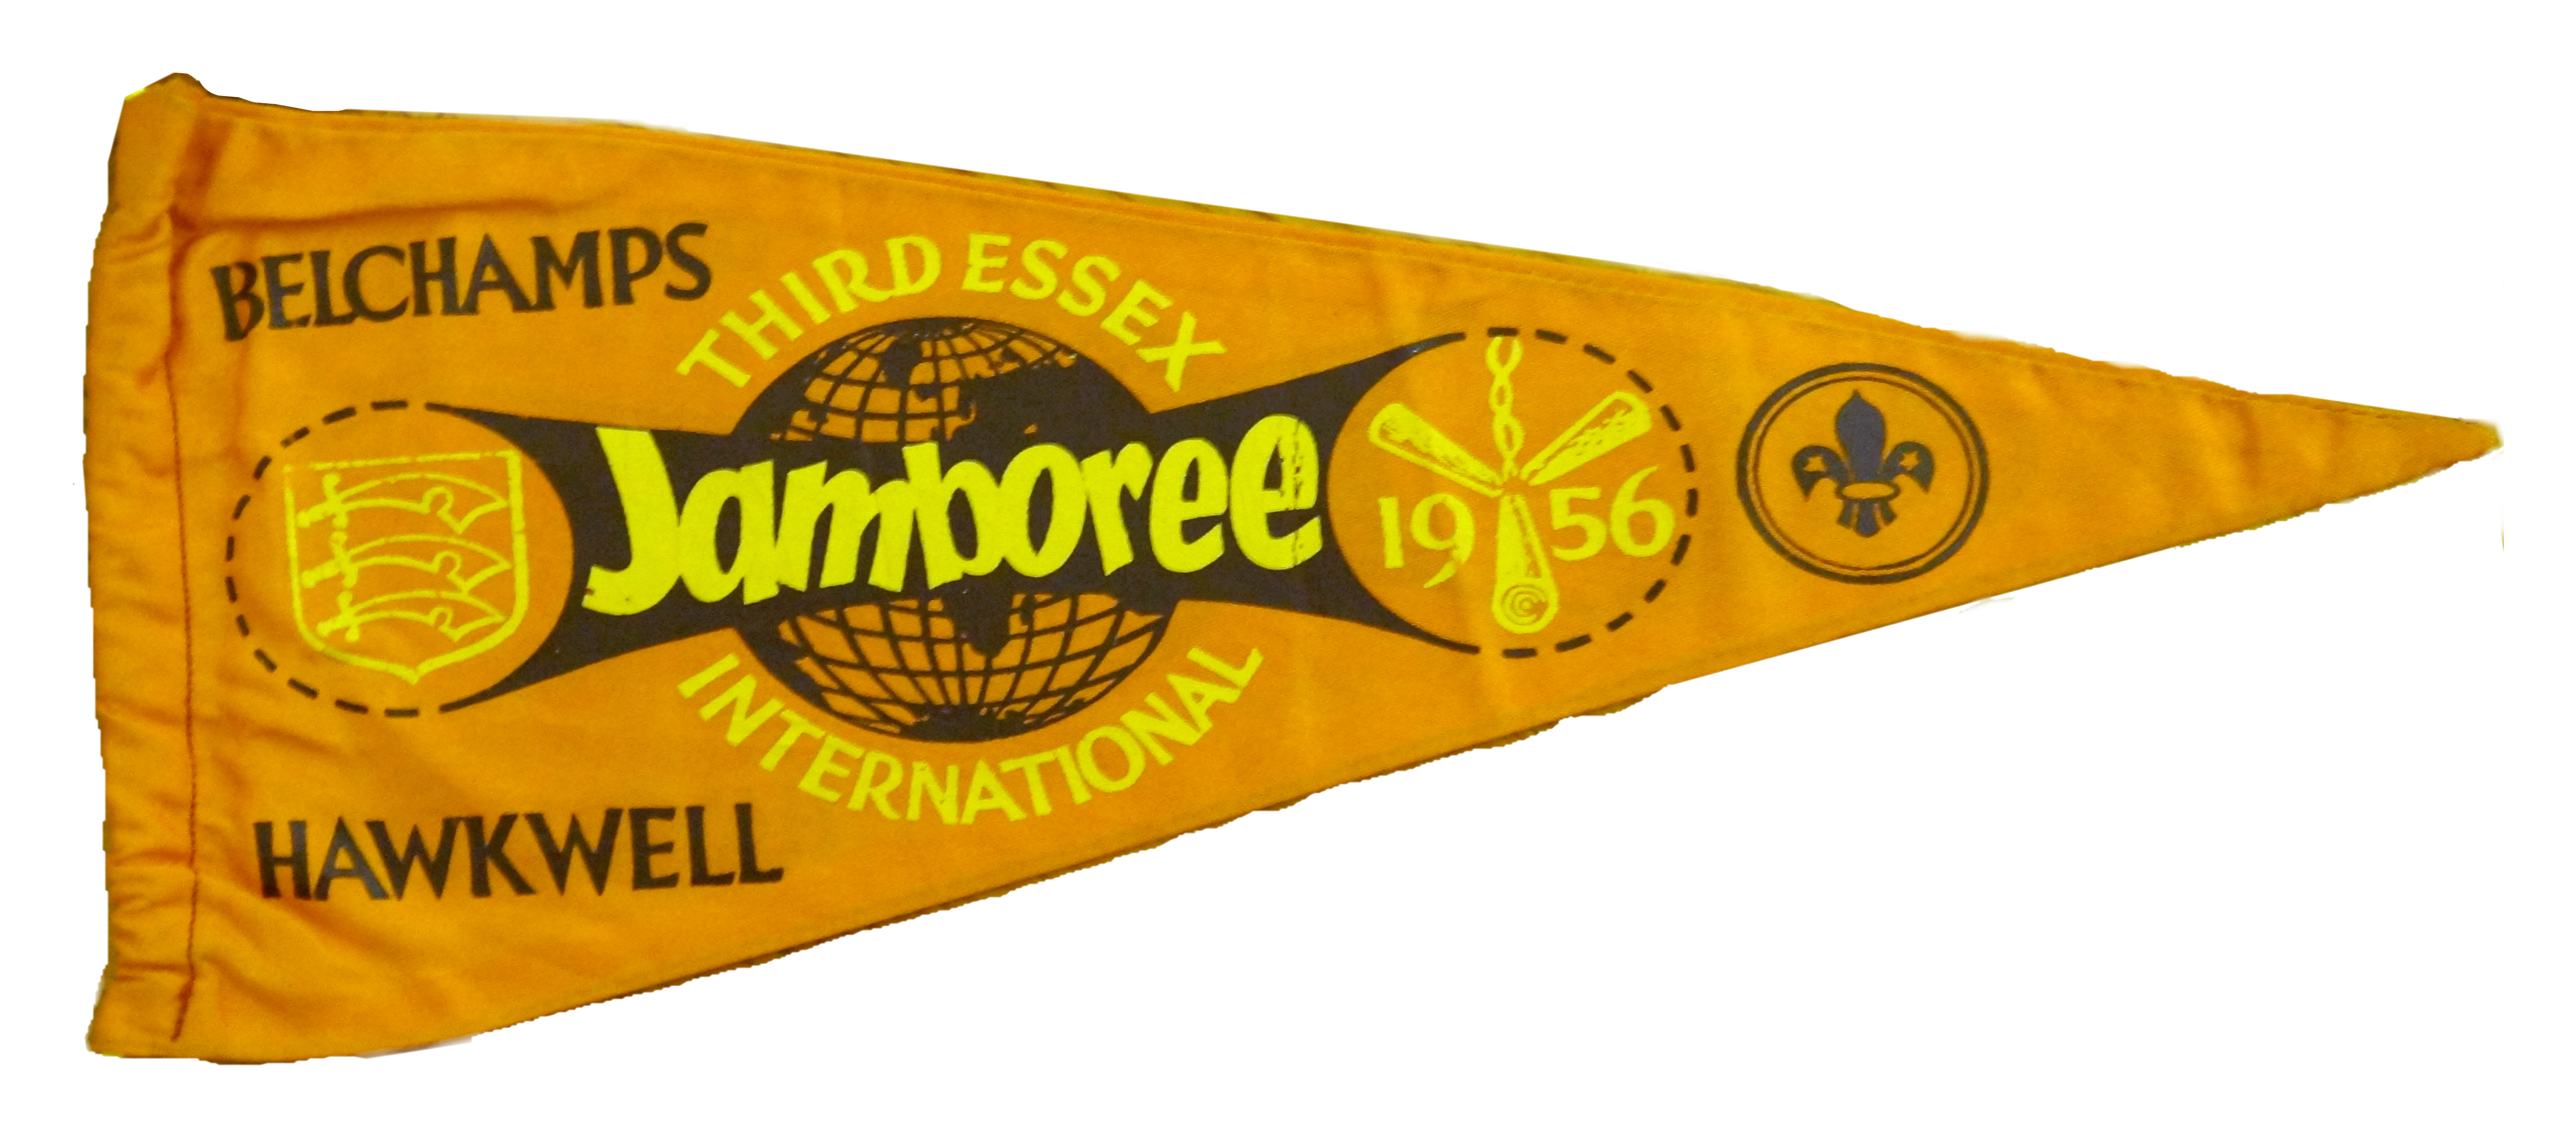 Belchamps Jambree Scout Banner Pennant 1956